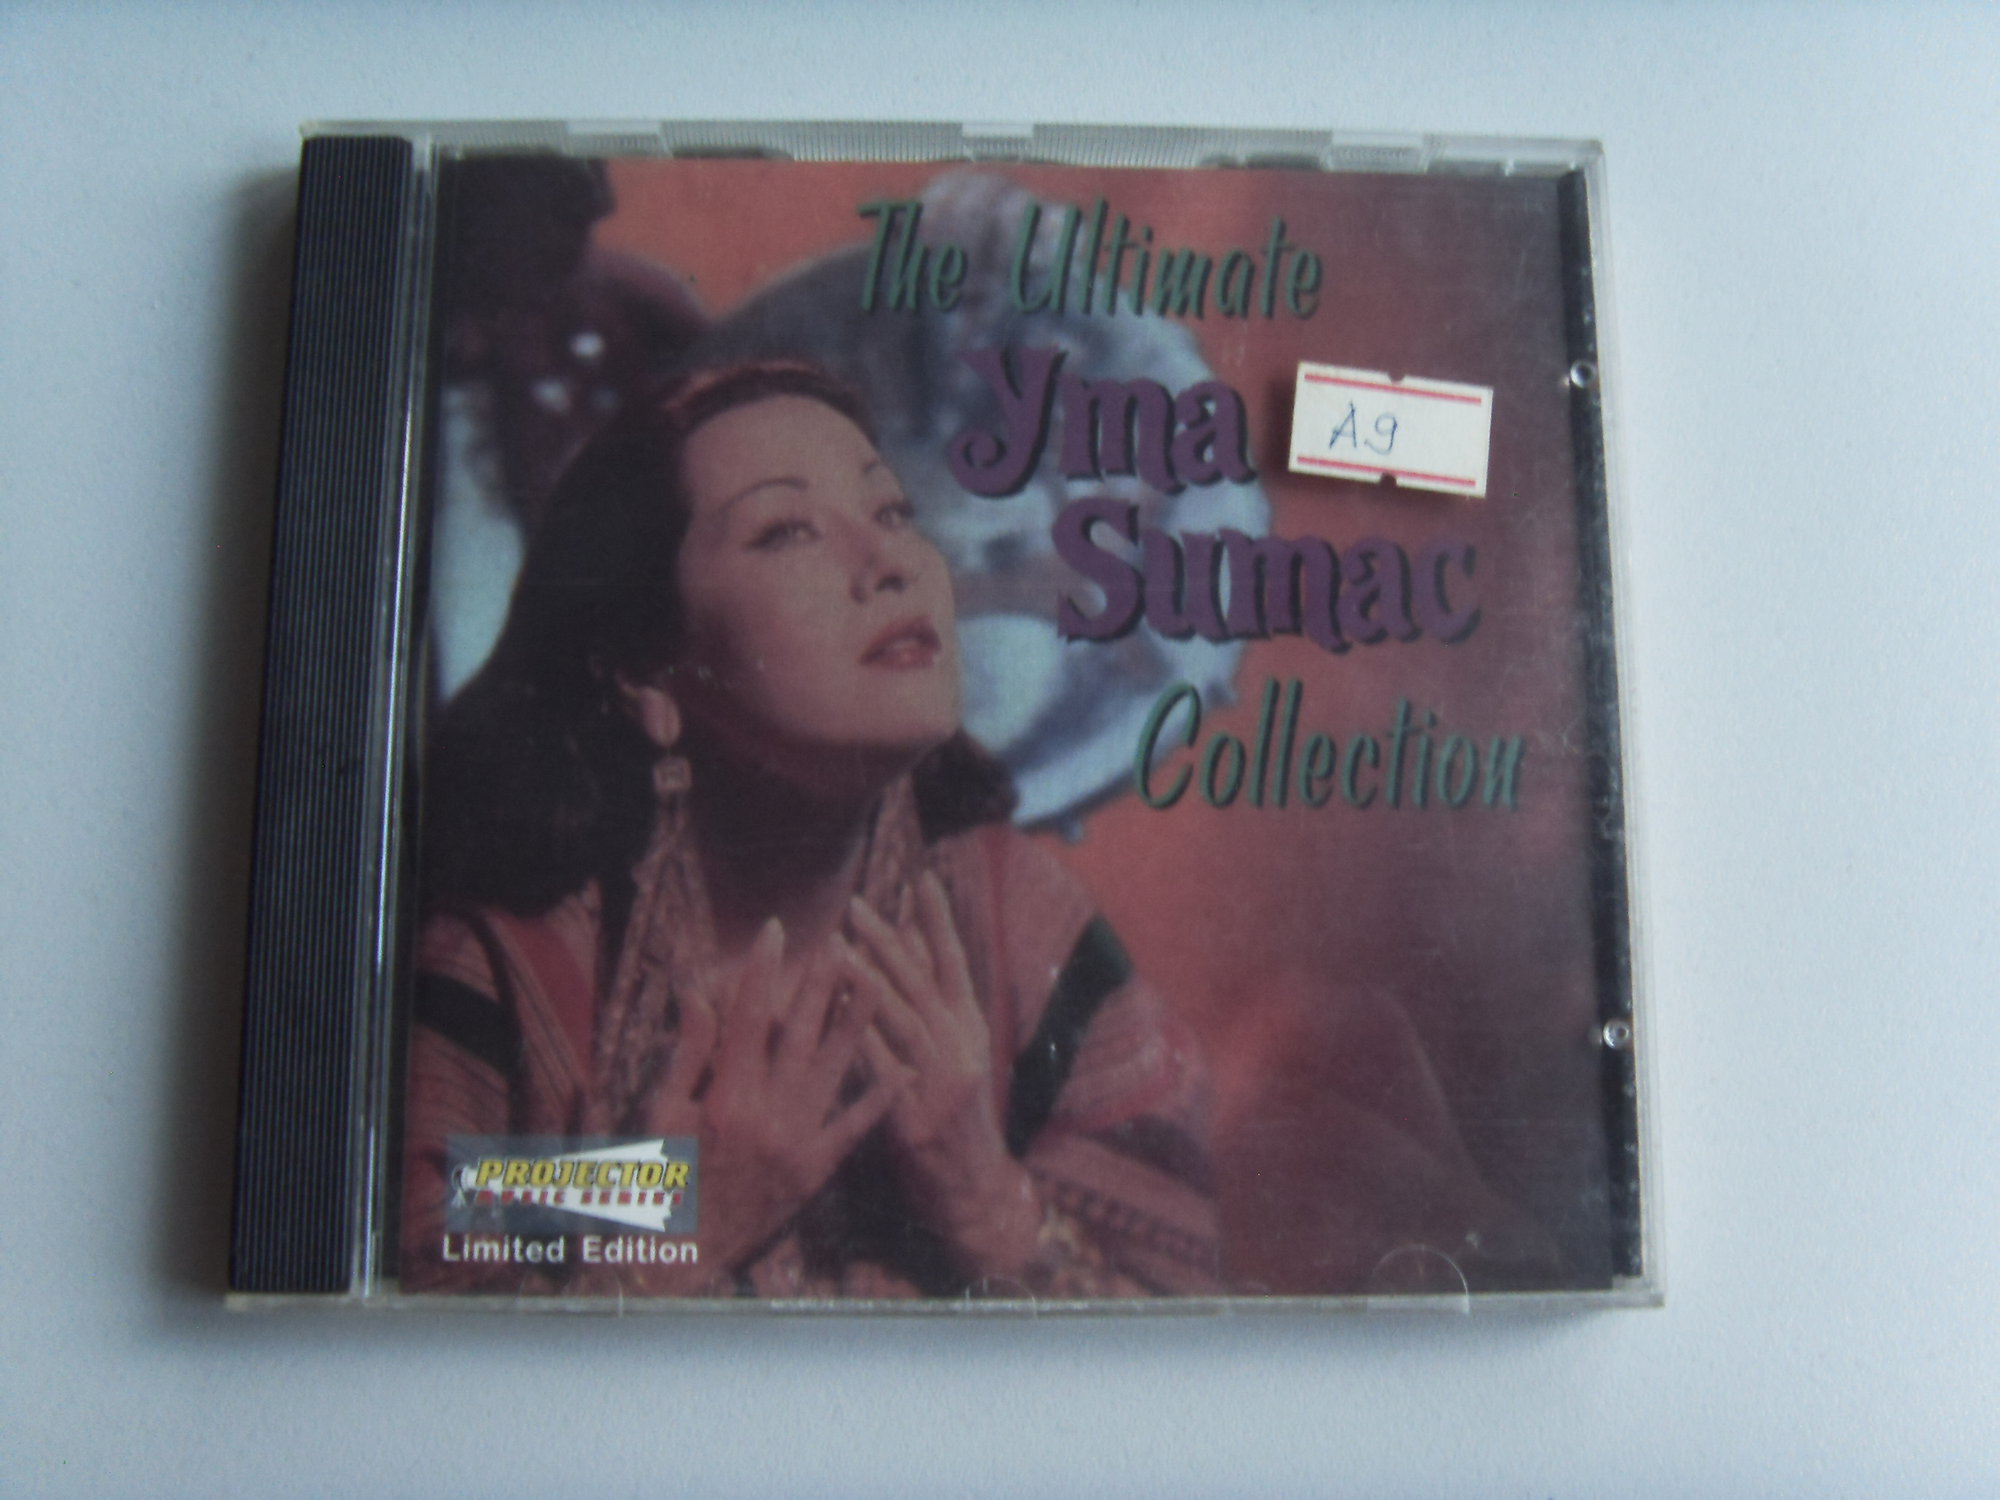 Yma SUMAC The ultimate collection